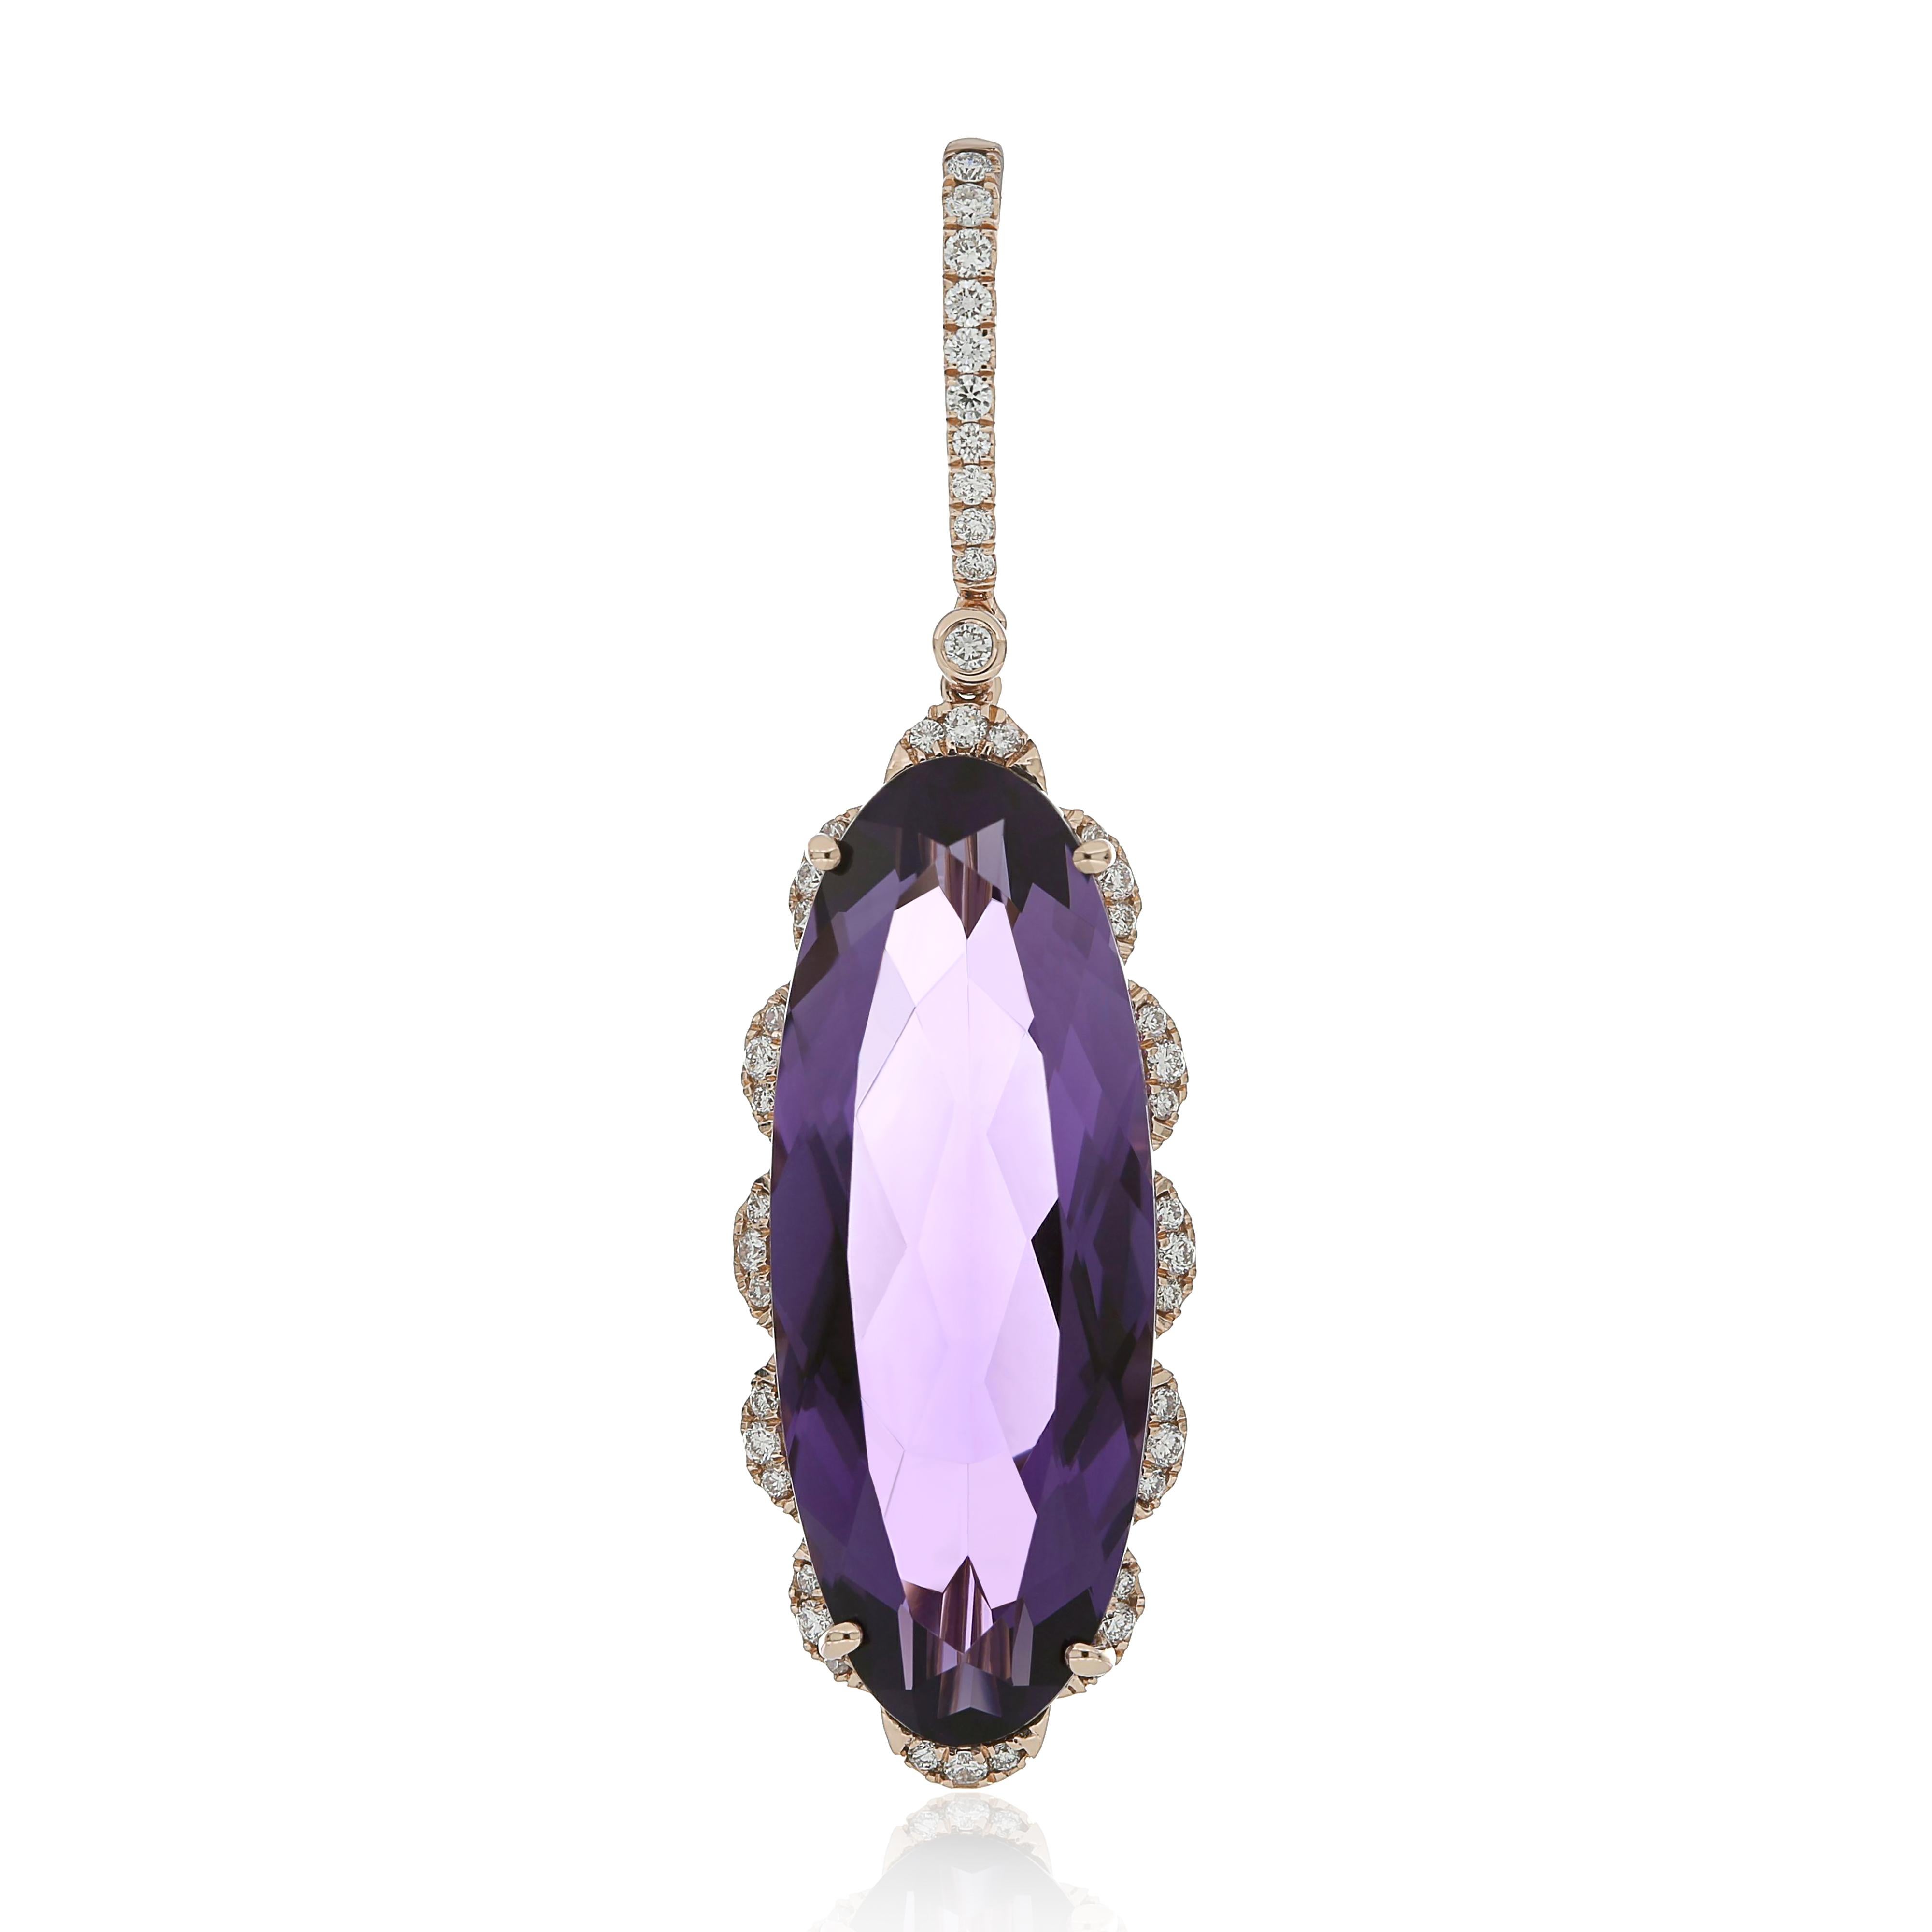 Elegant and exquisitely detailed 14 Karat Rose Gold Pendant, center set with 10.40 Cts .Oval Shape Amethyst, and micro pave set Diamonds, weighing approx. 0.228 Cts Beautifully Hand crafted in 14 Karat Rose Gold.

Stone Detail:
Amethyst: